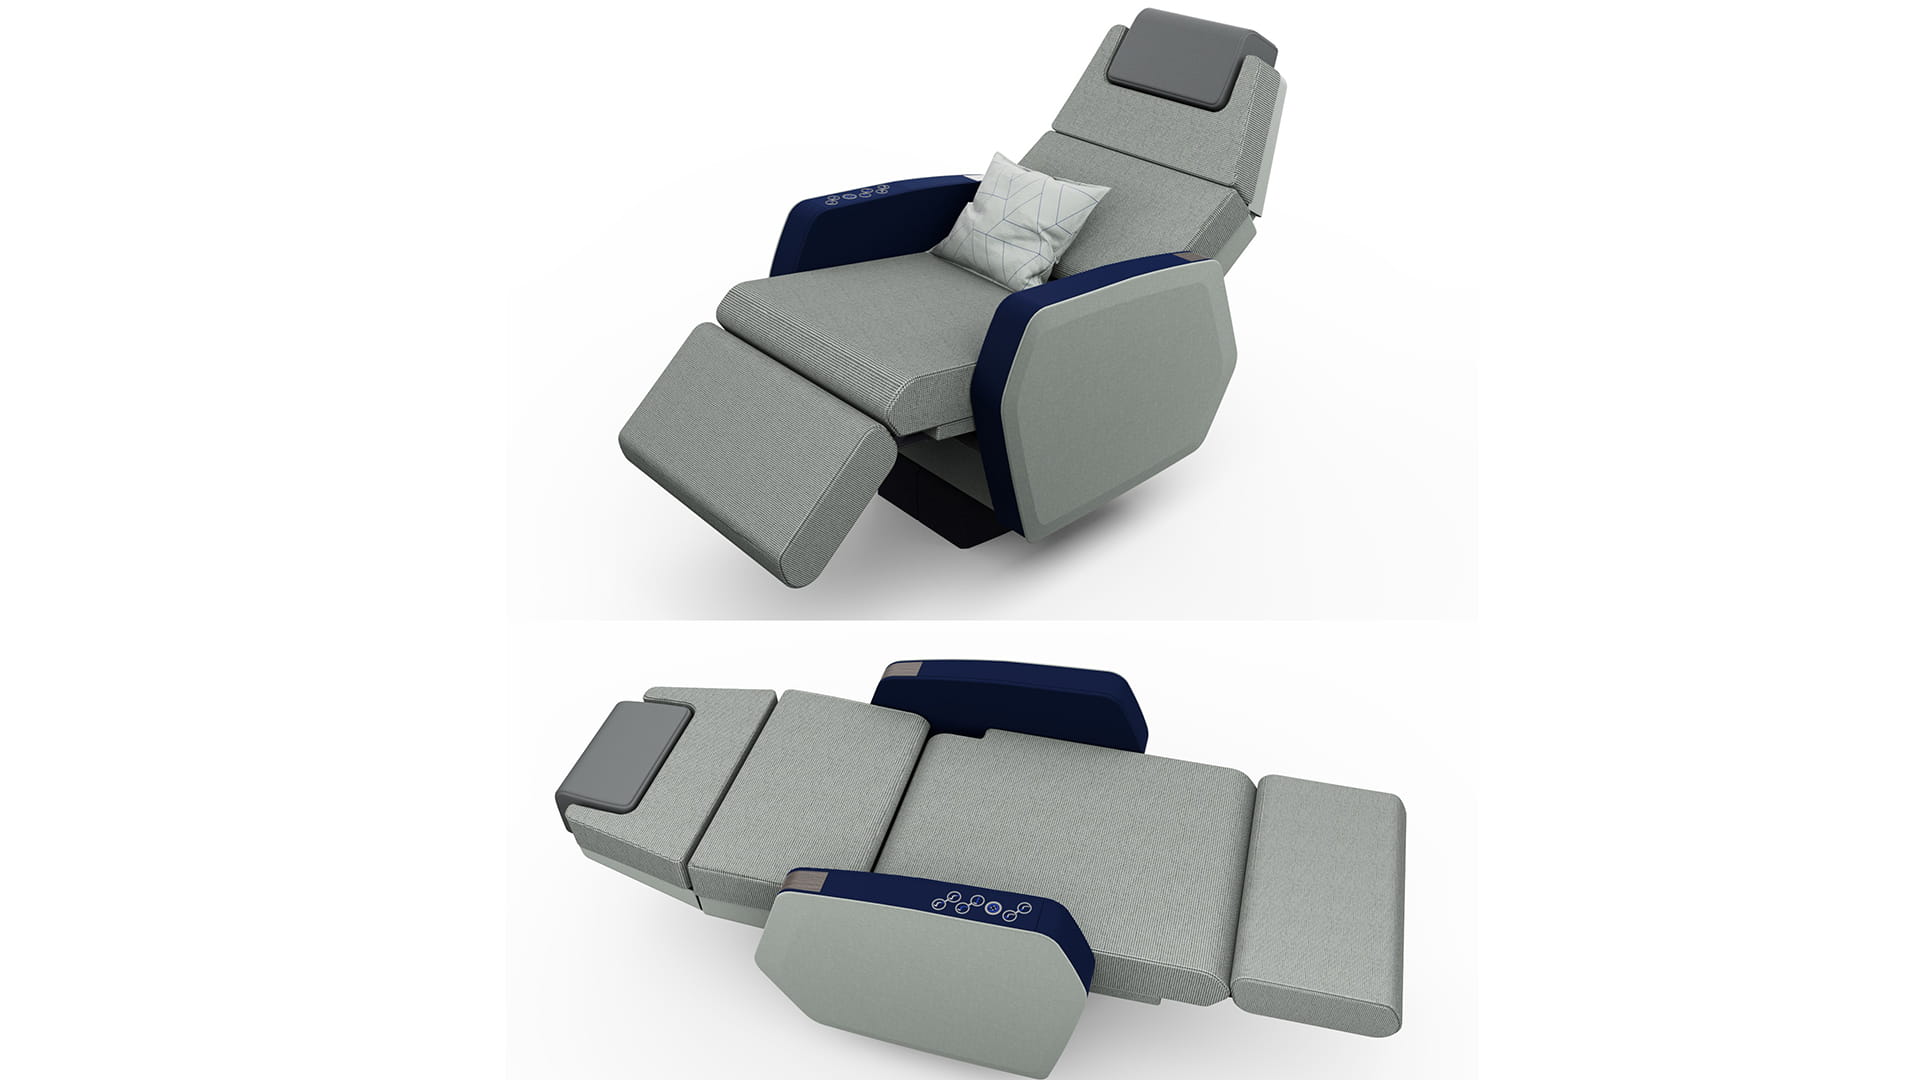 2 renderings of airplane seat; one reclining and one lying flat